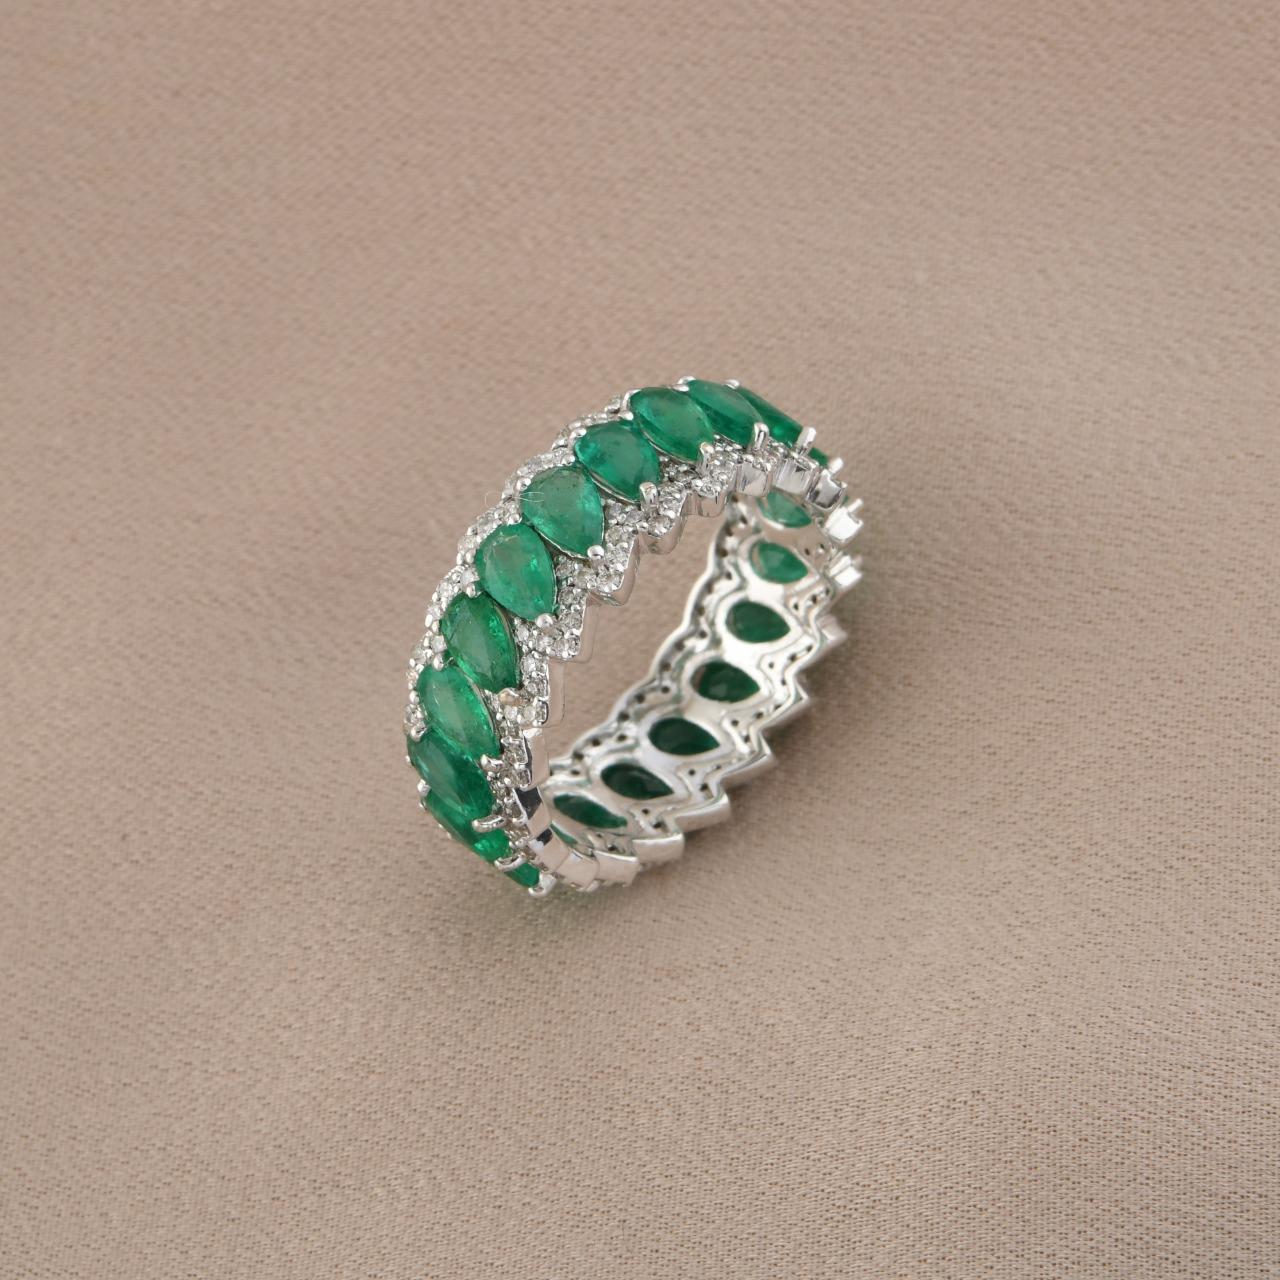 Eternity band in 18k gold with pear cut emeralds and round brilliant cut diamonds 💎, about total ct 4,50.  
Emeralds pear cut ct 4, from Zambia.
Diamonds ct 0,50 G-H/VS-SI.
Current size 54.